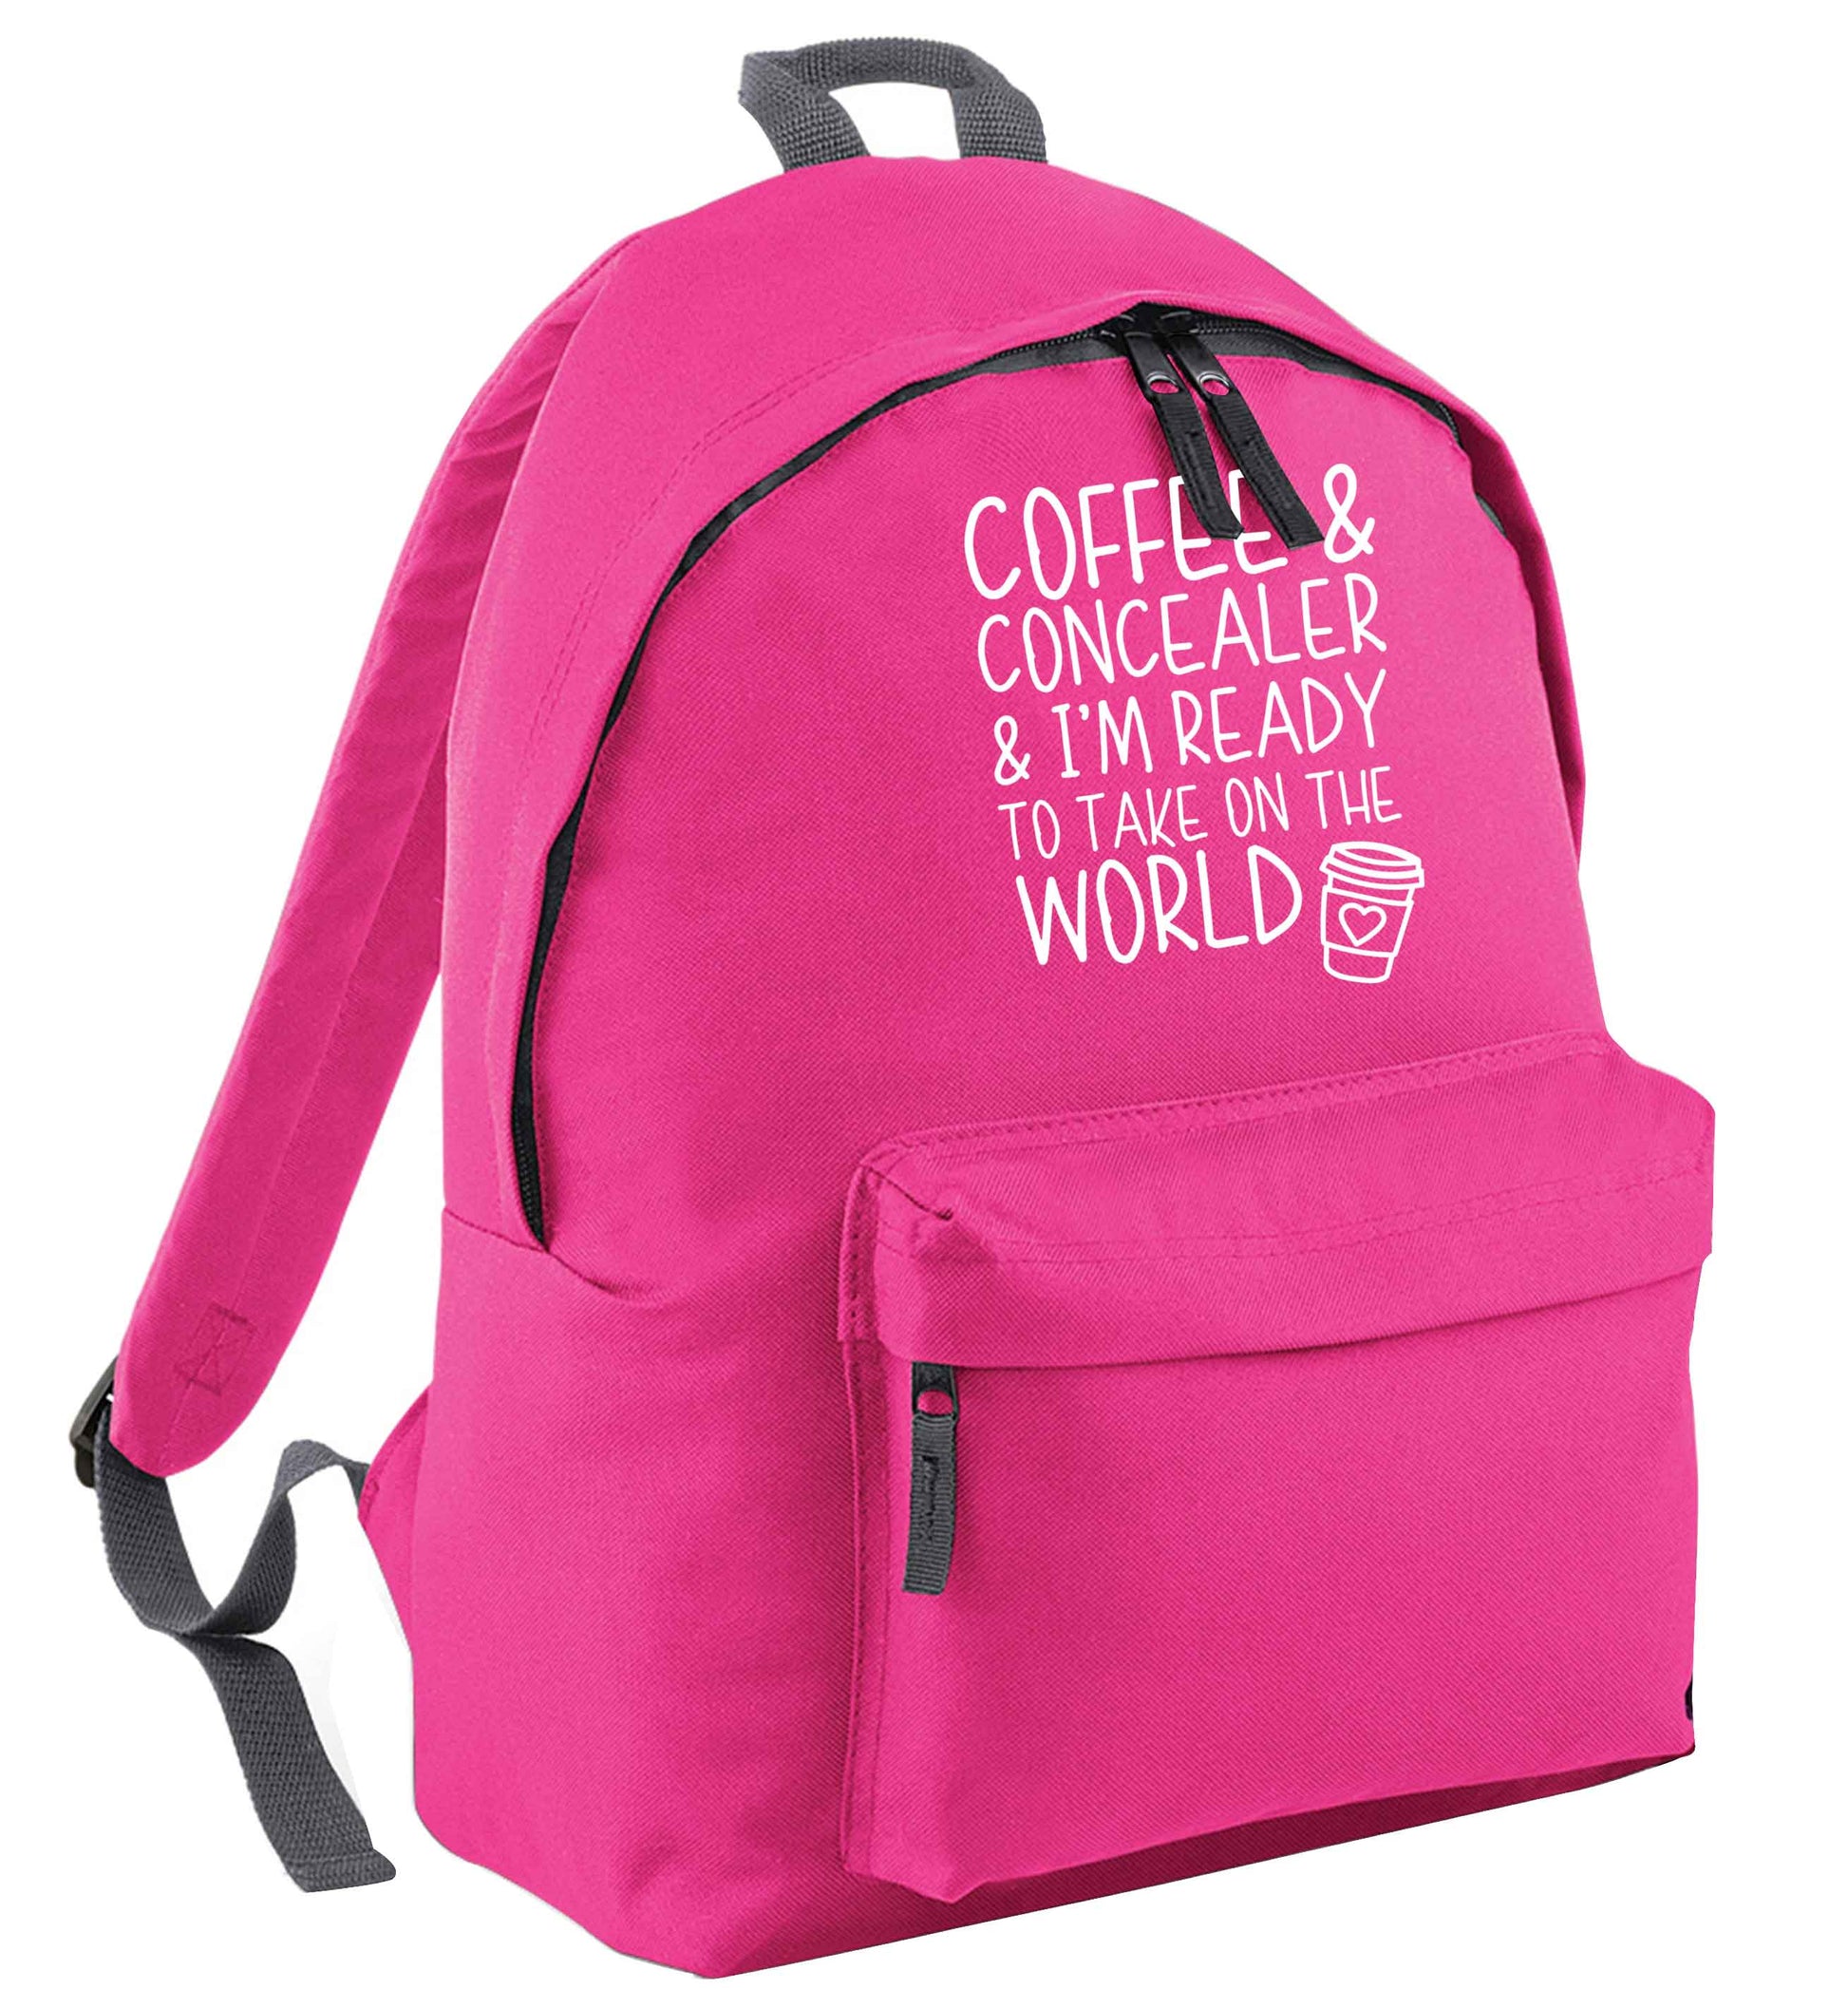 Coffee and concealer and I'm ready to take on the world pink adults backpack